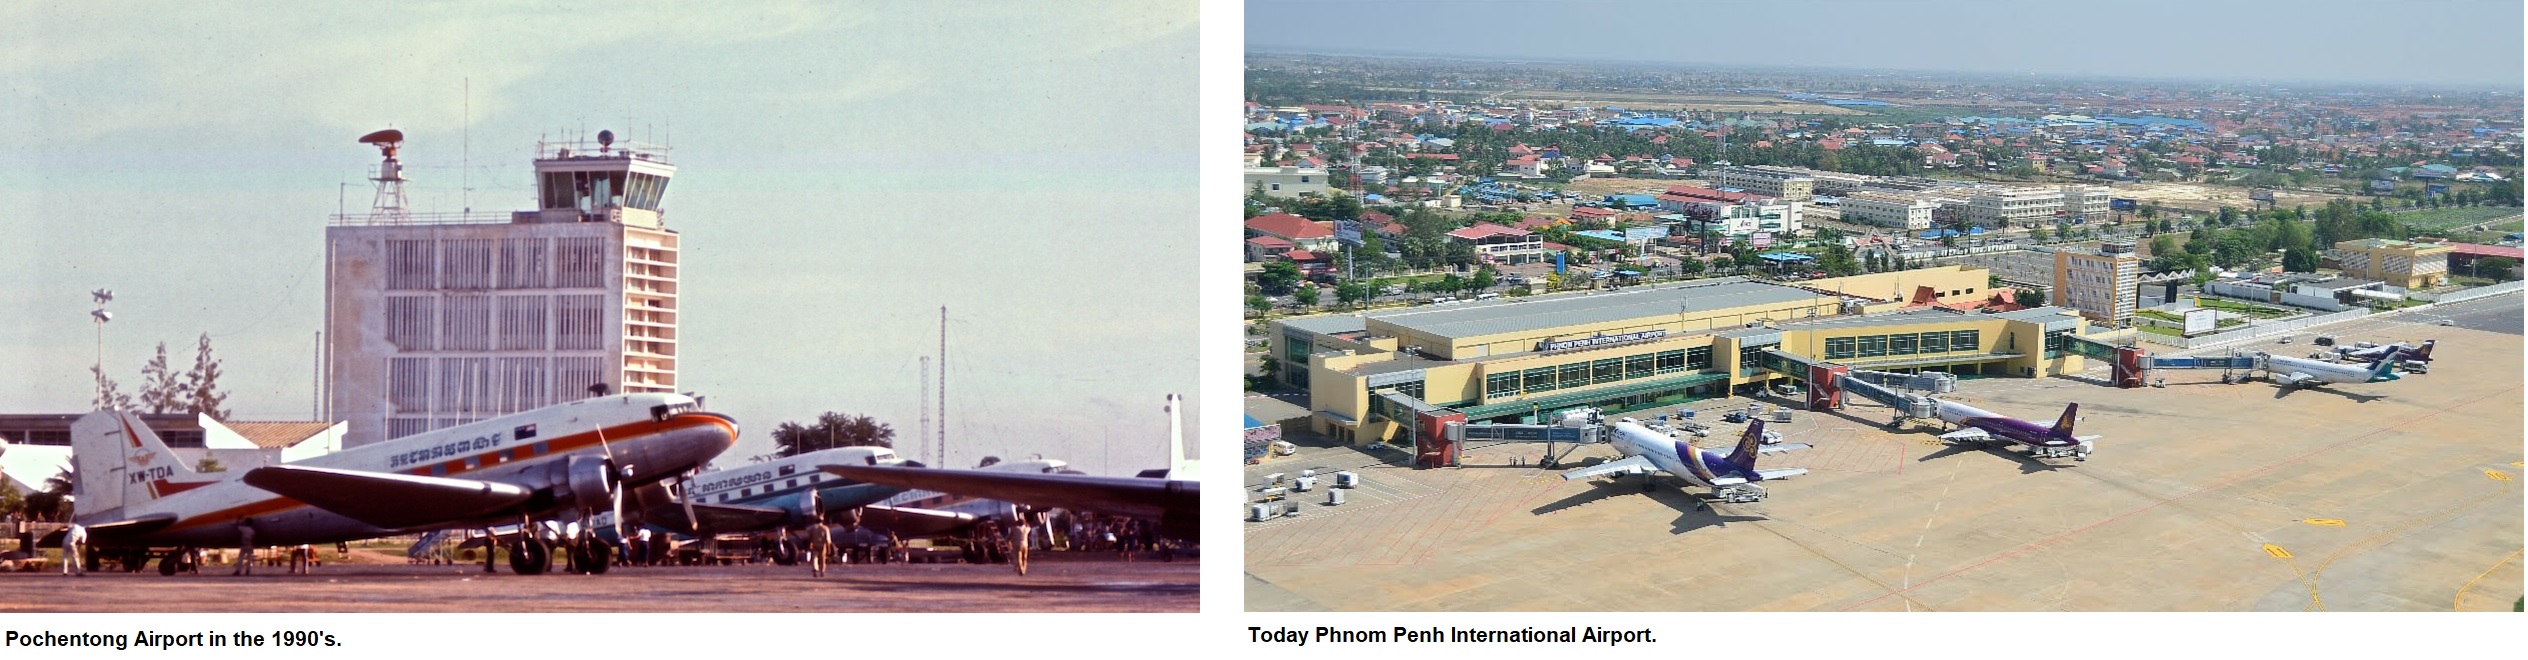 Phnom Penh International Airport in the 1990s and today.jpg